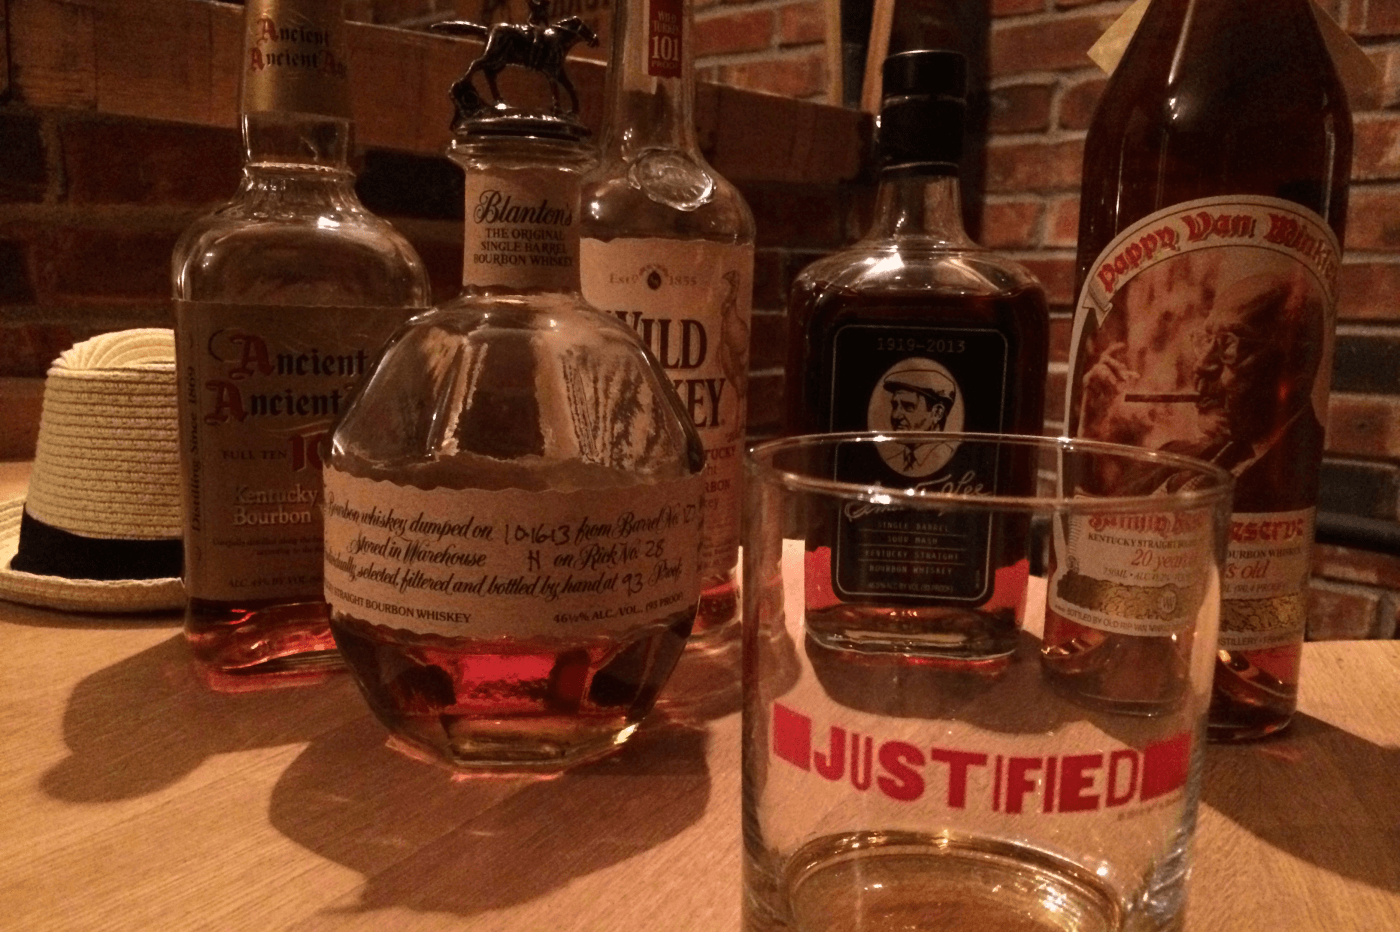 THE JUSTIFIED GUIDE TO THE BEST KENTUCKY BOURBON UNDER $100